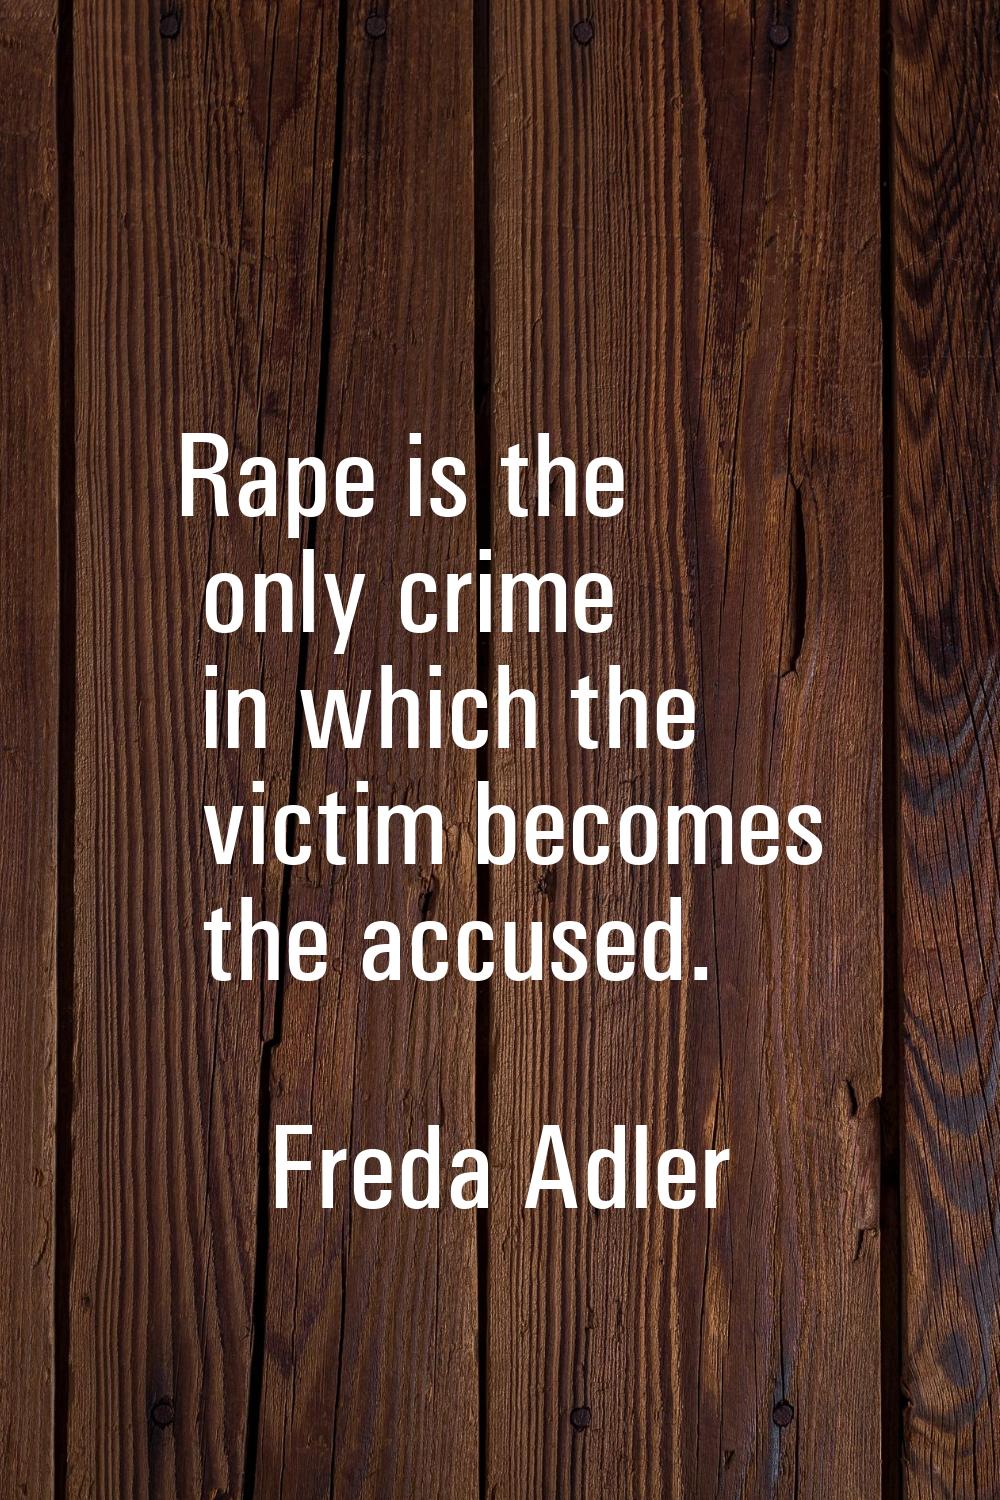 Rape is the only crime in which the victim becomes the accused.